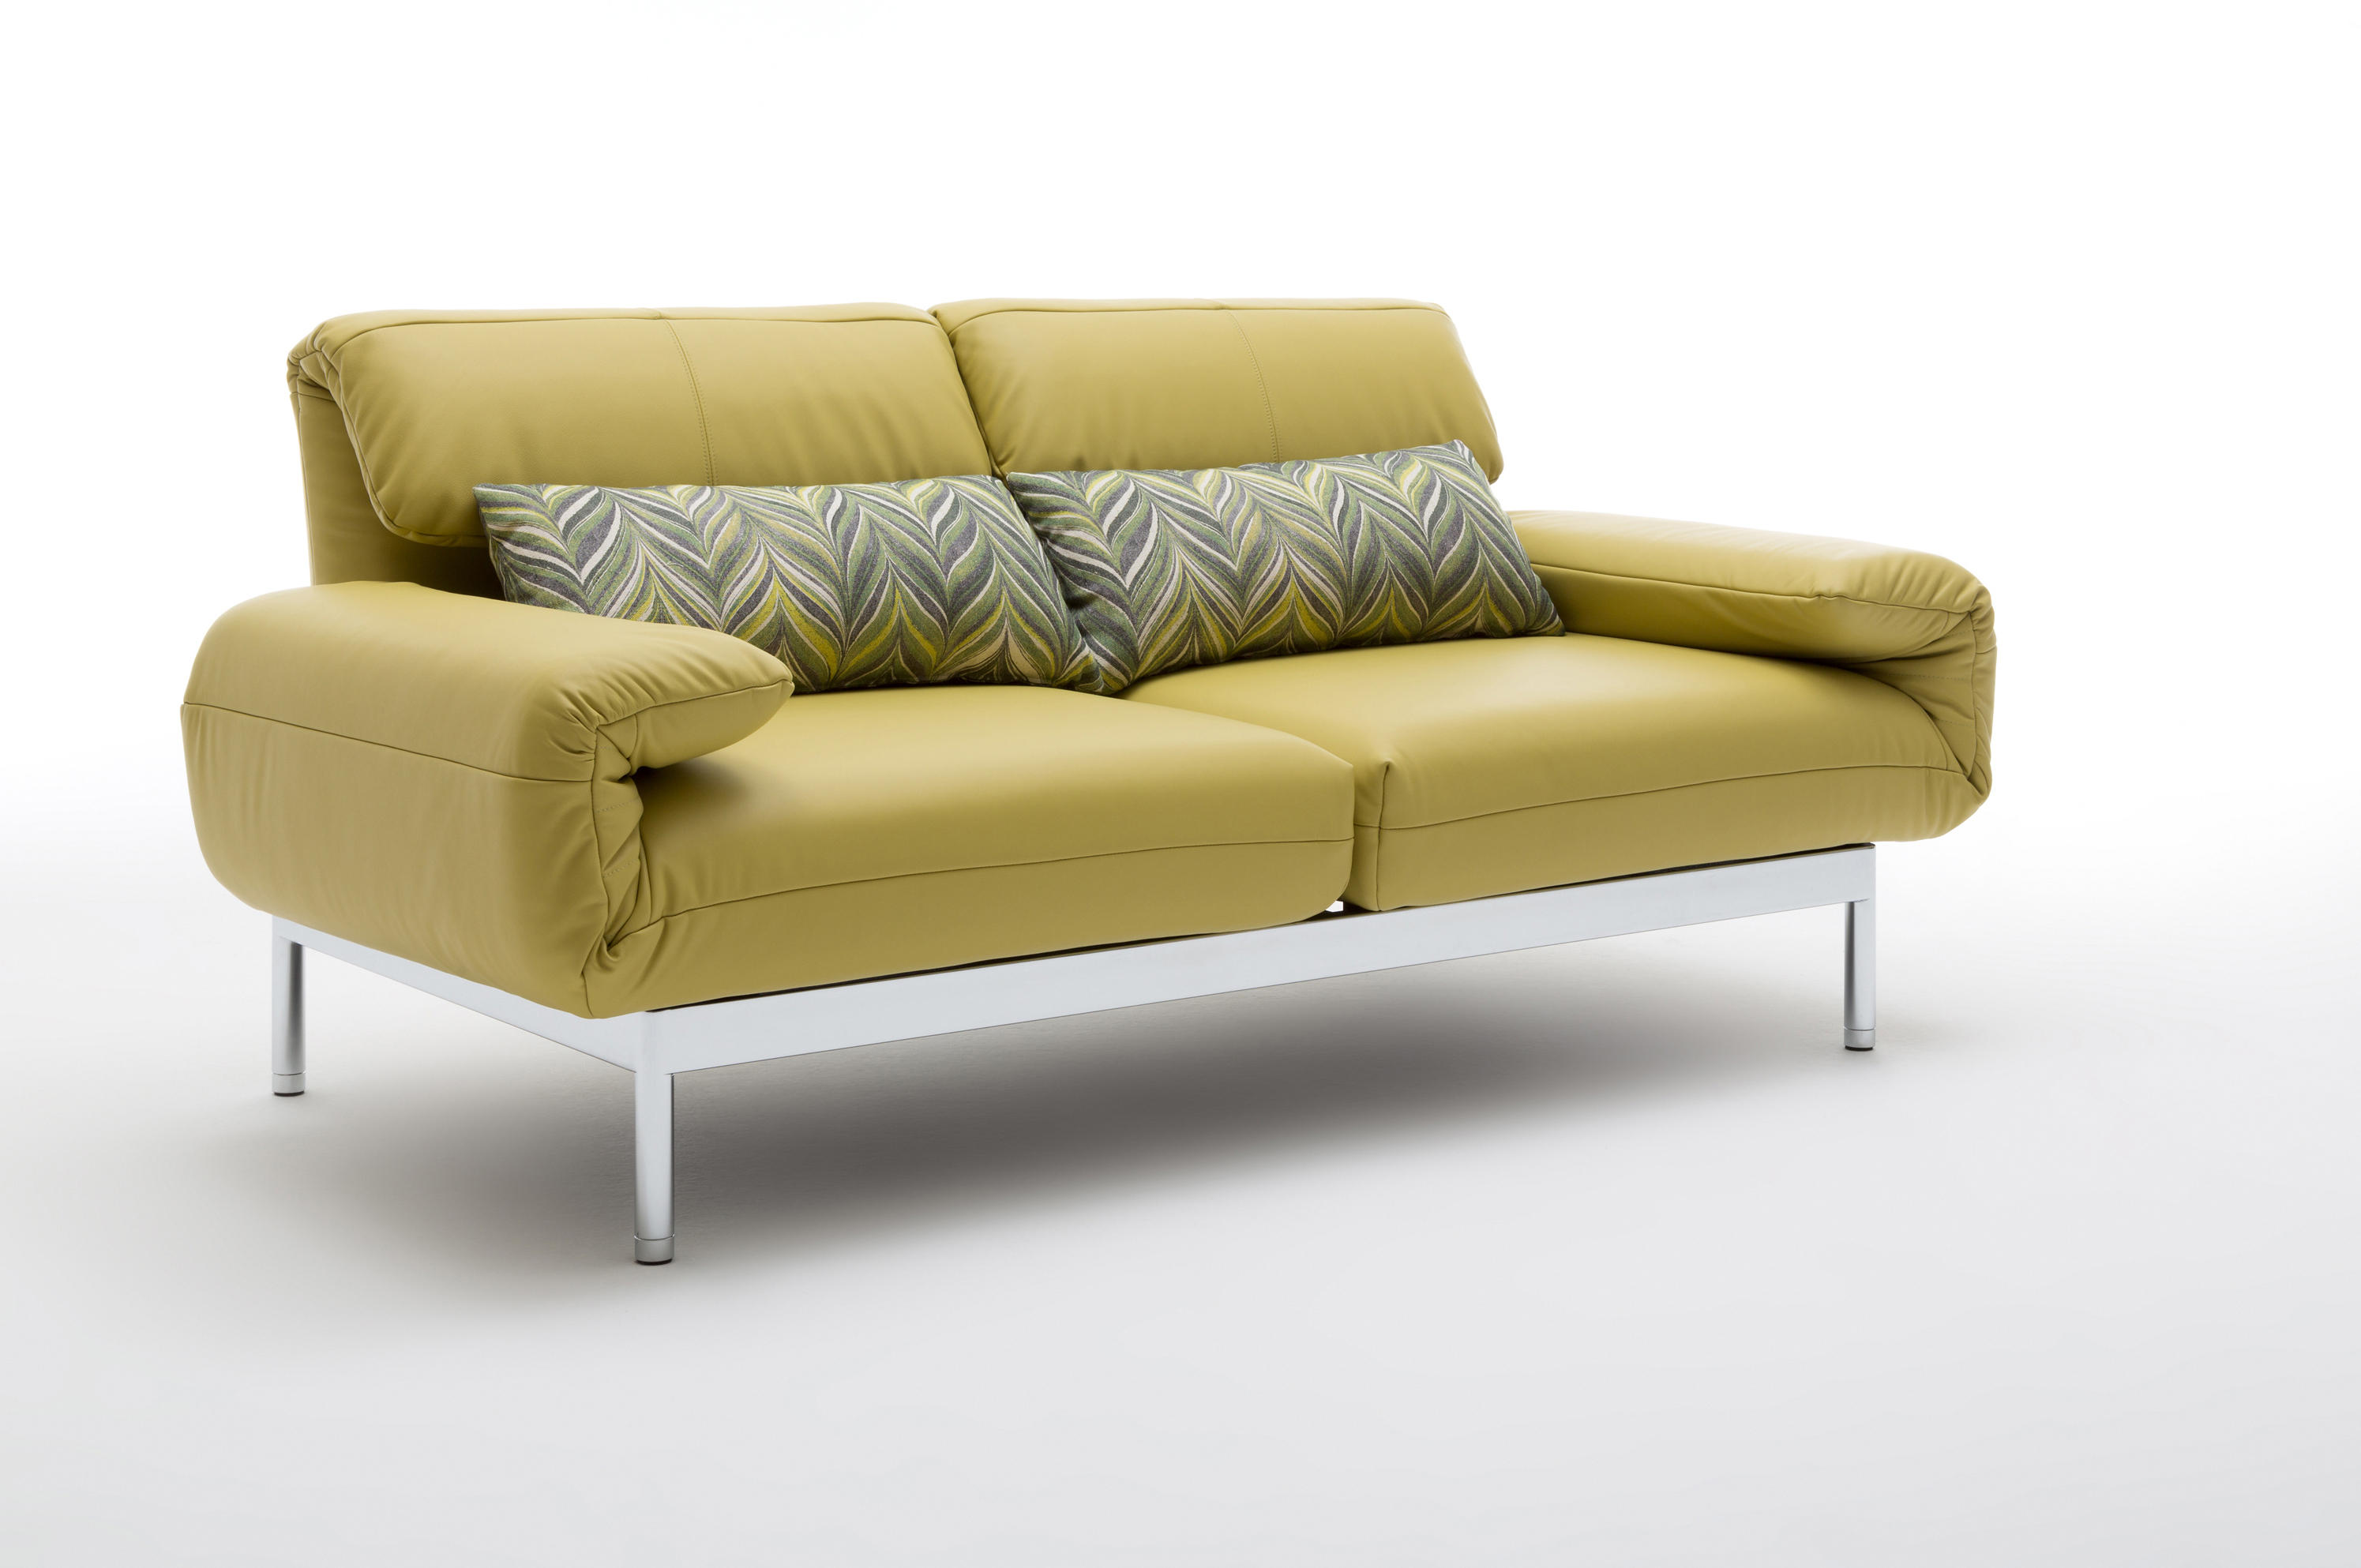 ROLF BENZ PLURA - Sofas from Rolf Benz | Architonic